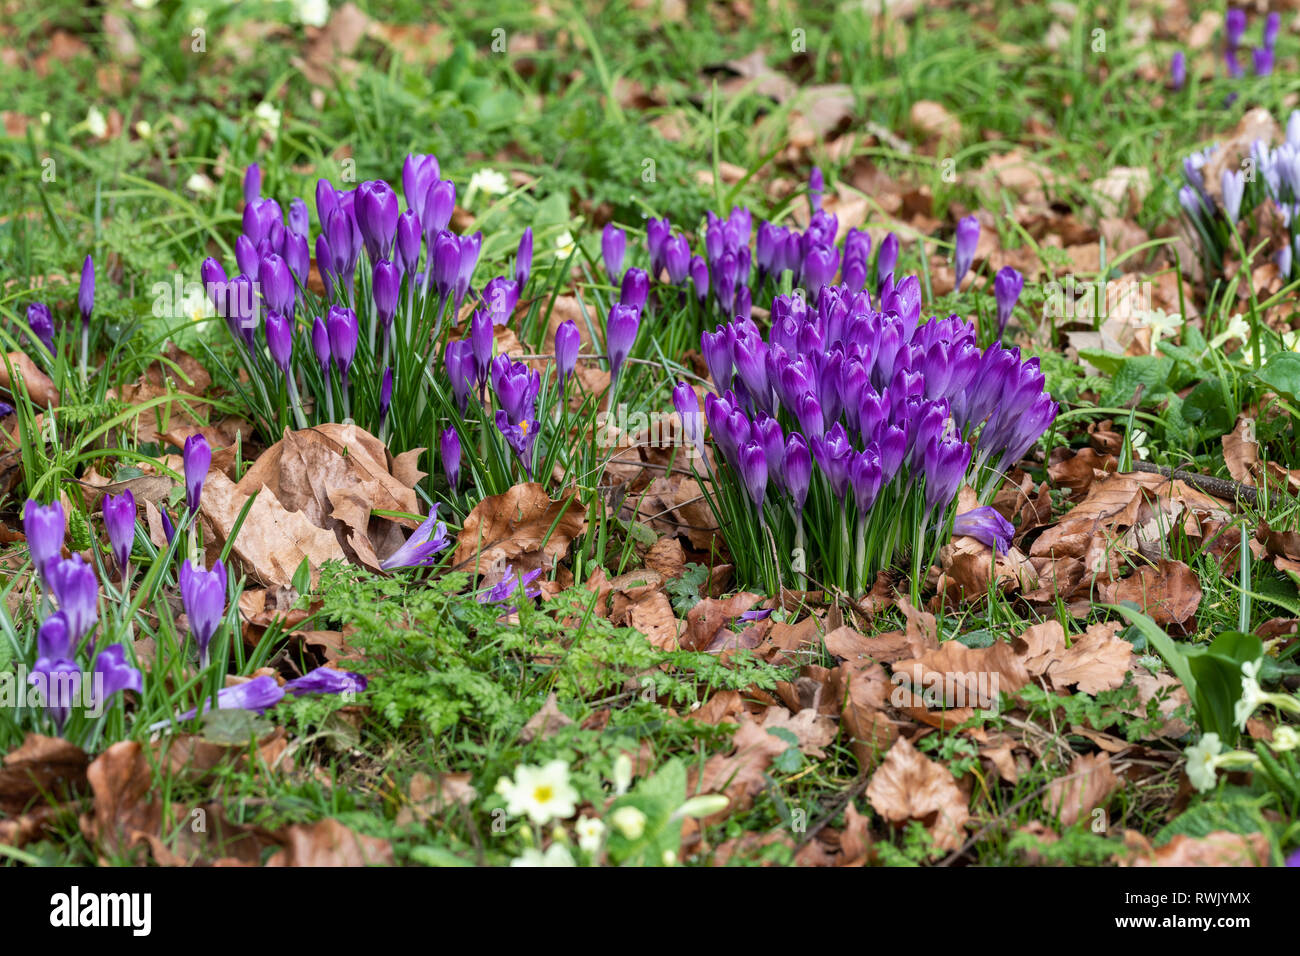 Close up of clumps of purple crocus flowering amongst the grass in a spring garden UK Stock Photo